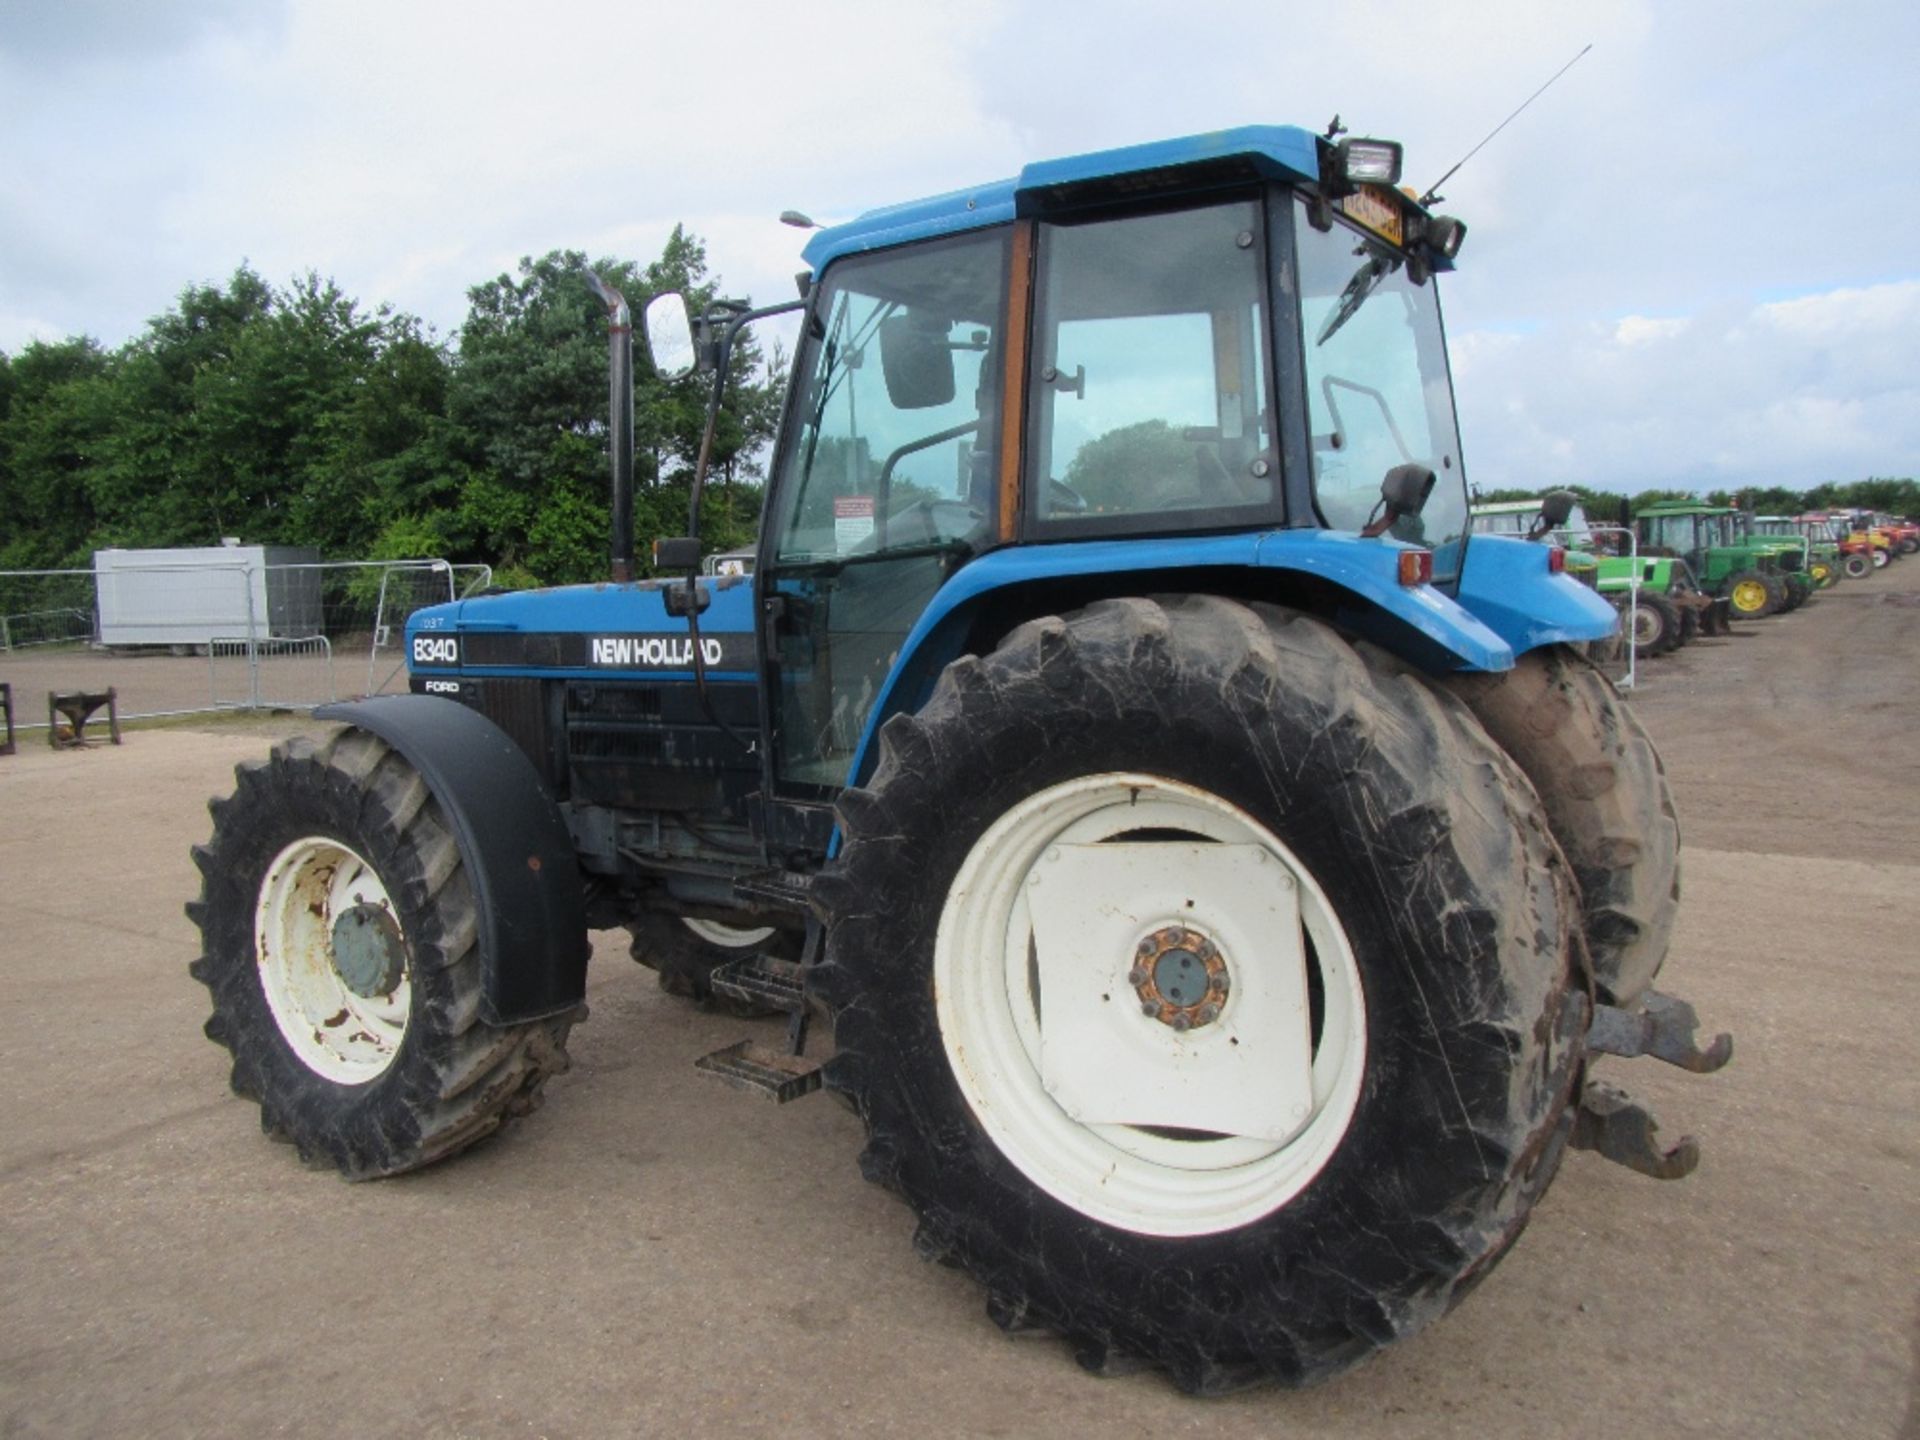 New Holland 8340 SLE 4wd Tractor. Reg. No. N243 SCN Ser. No. 025324B - Image 9 of 20